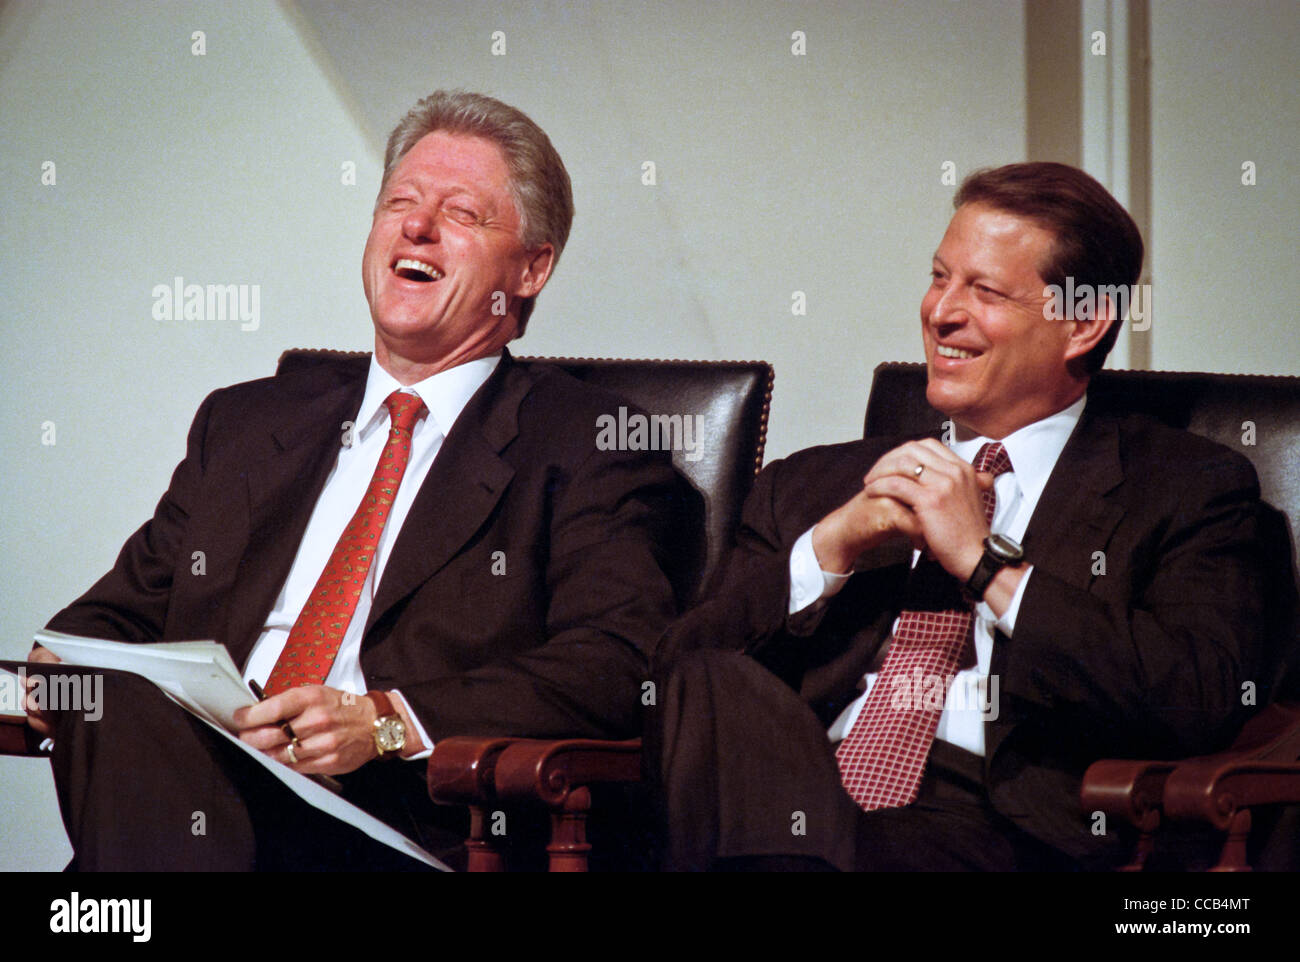 President Bill Clinton Shares A Laugh With Vice President Al Gore During A Discussion On The Computer Glitch Known As The Year 2000 Problem Or By It S Acronym Y2k At The National Academy